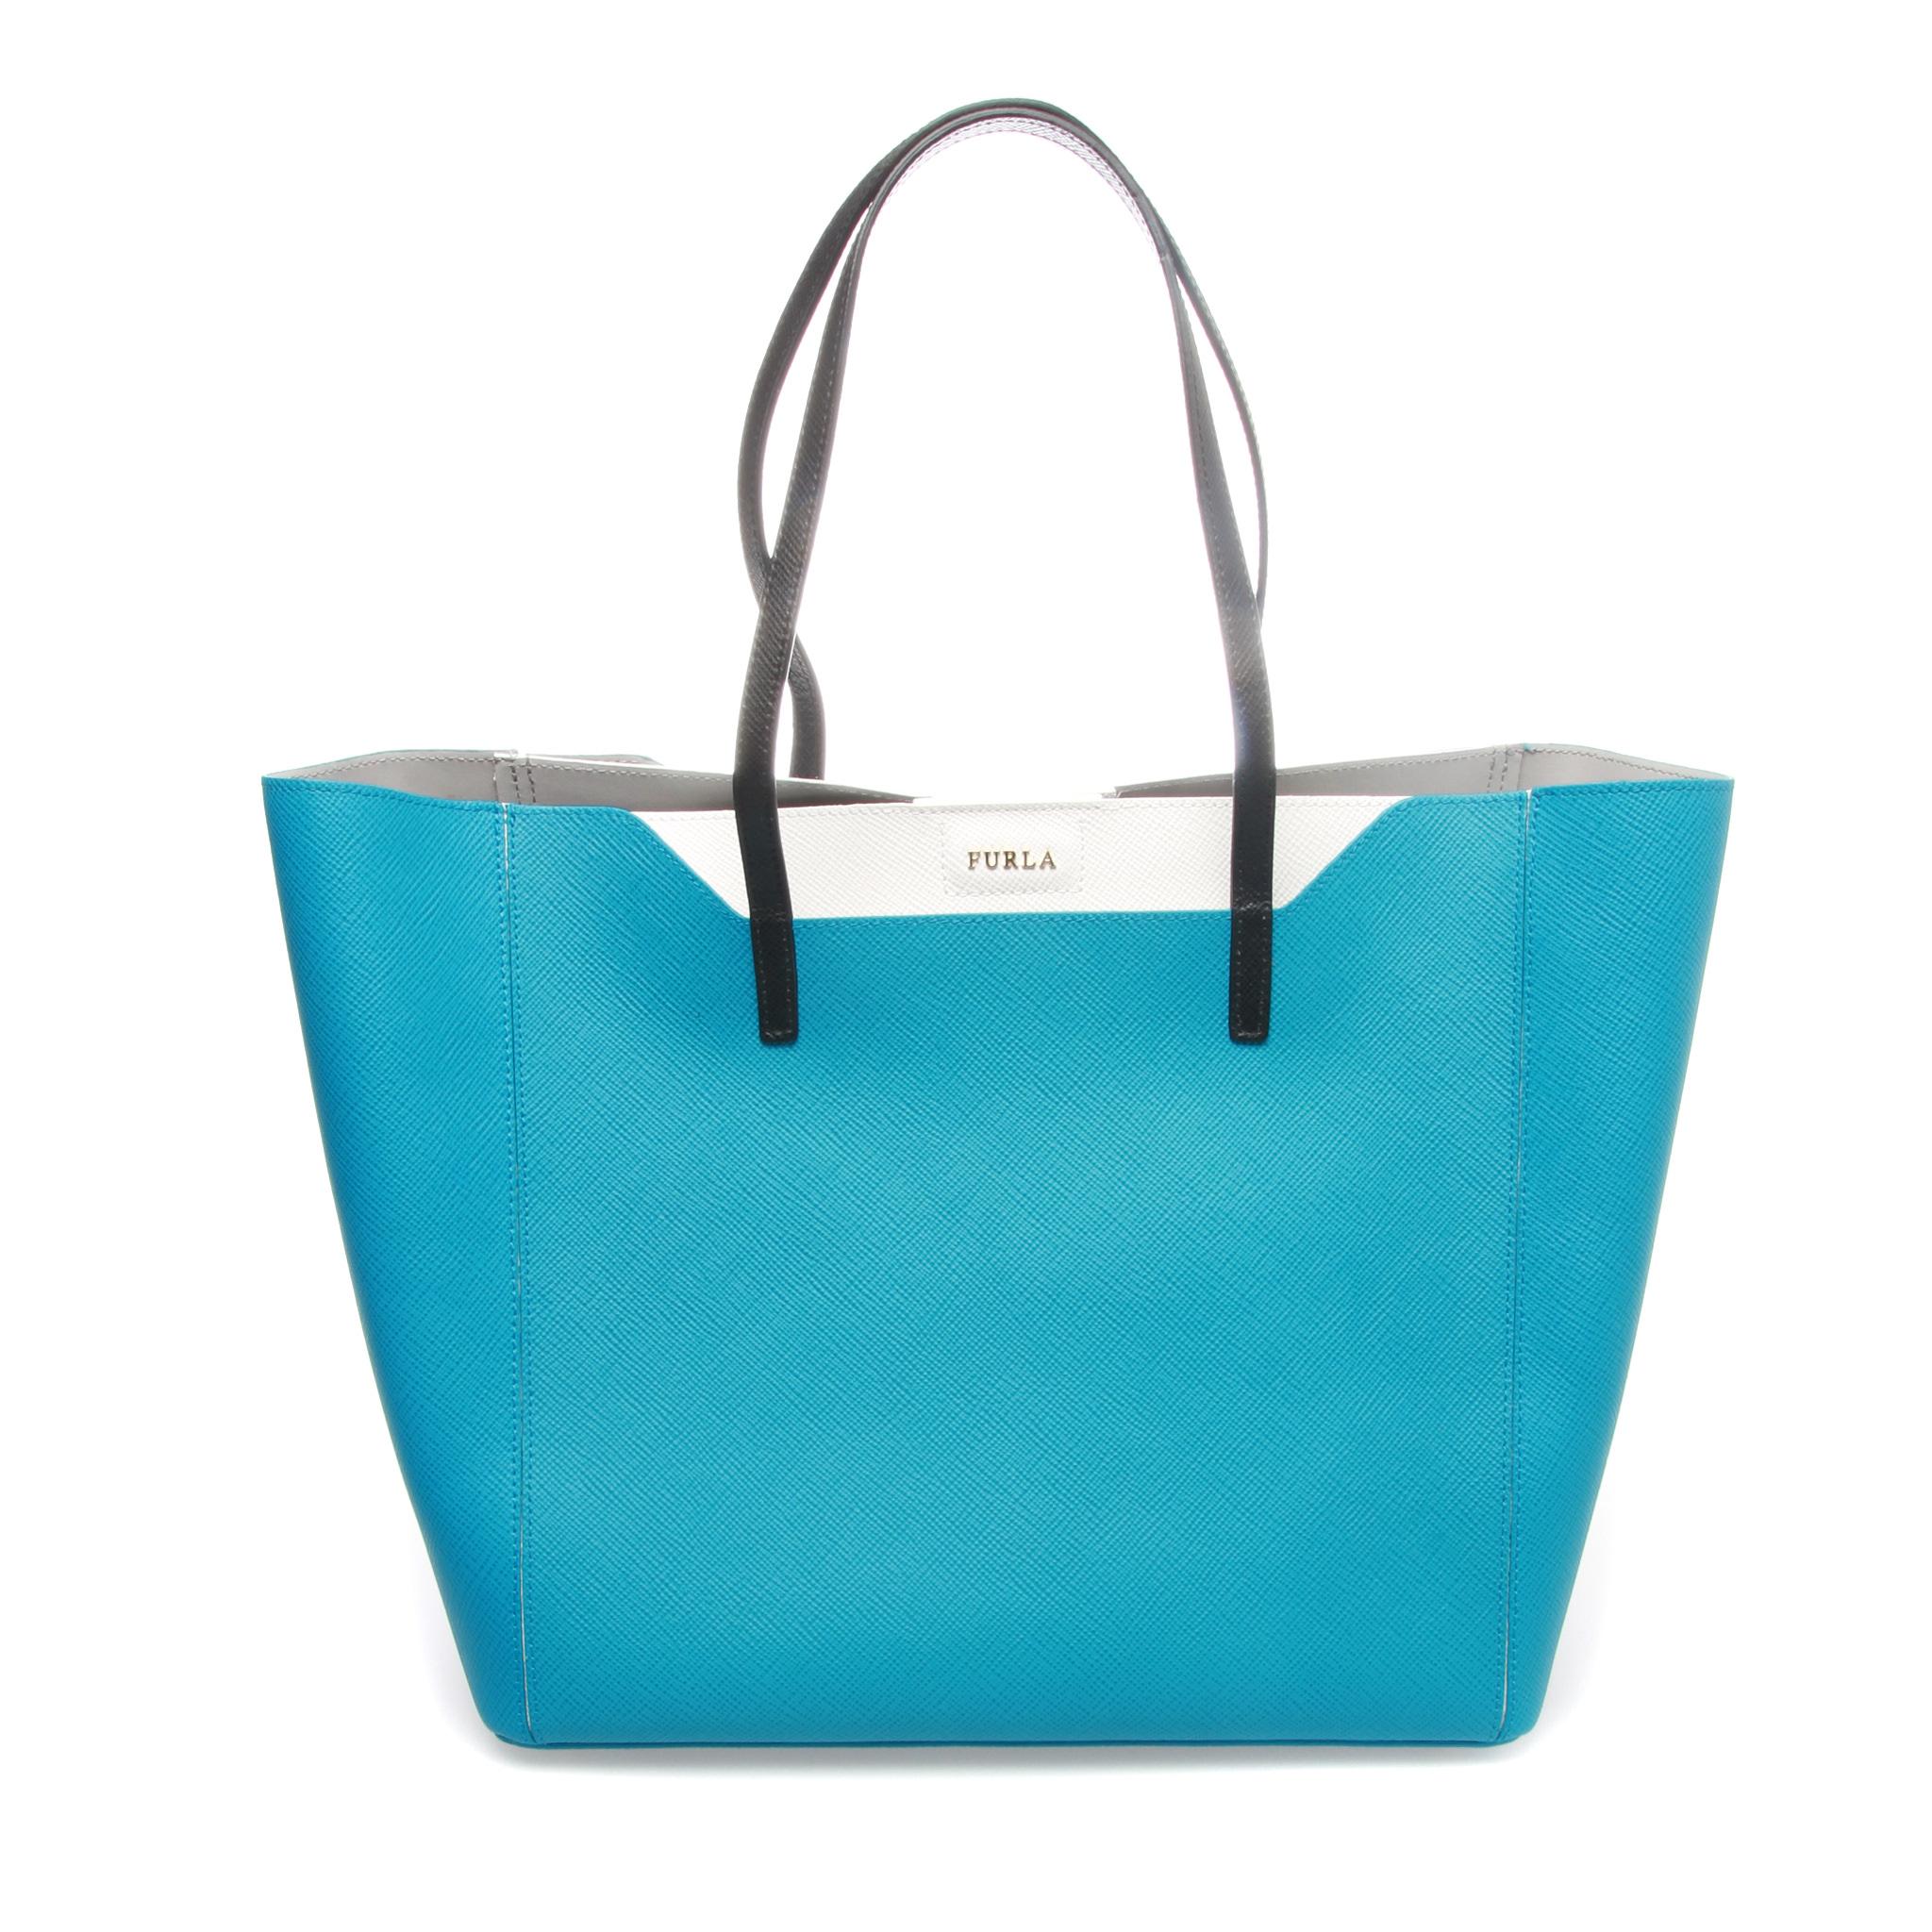 FURLA Fantasia Tote

The Fantasia bag is a new basic tote that features an interesting and practical shape.
Featuring a leather strap easy to carry around, fun to match with your outfit and lovely with its lively and fresh colours. Comes with dust